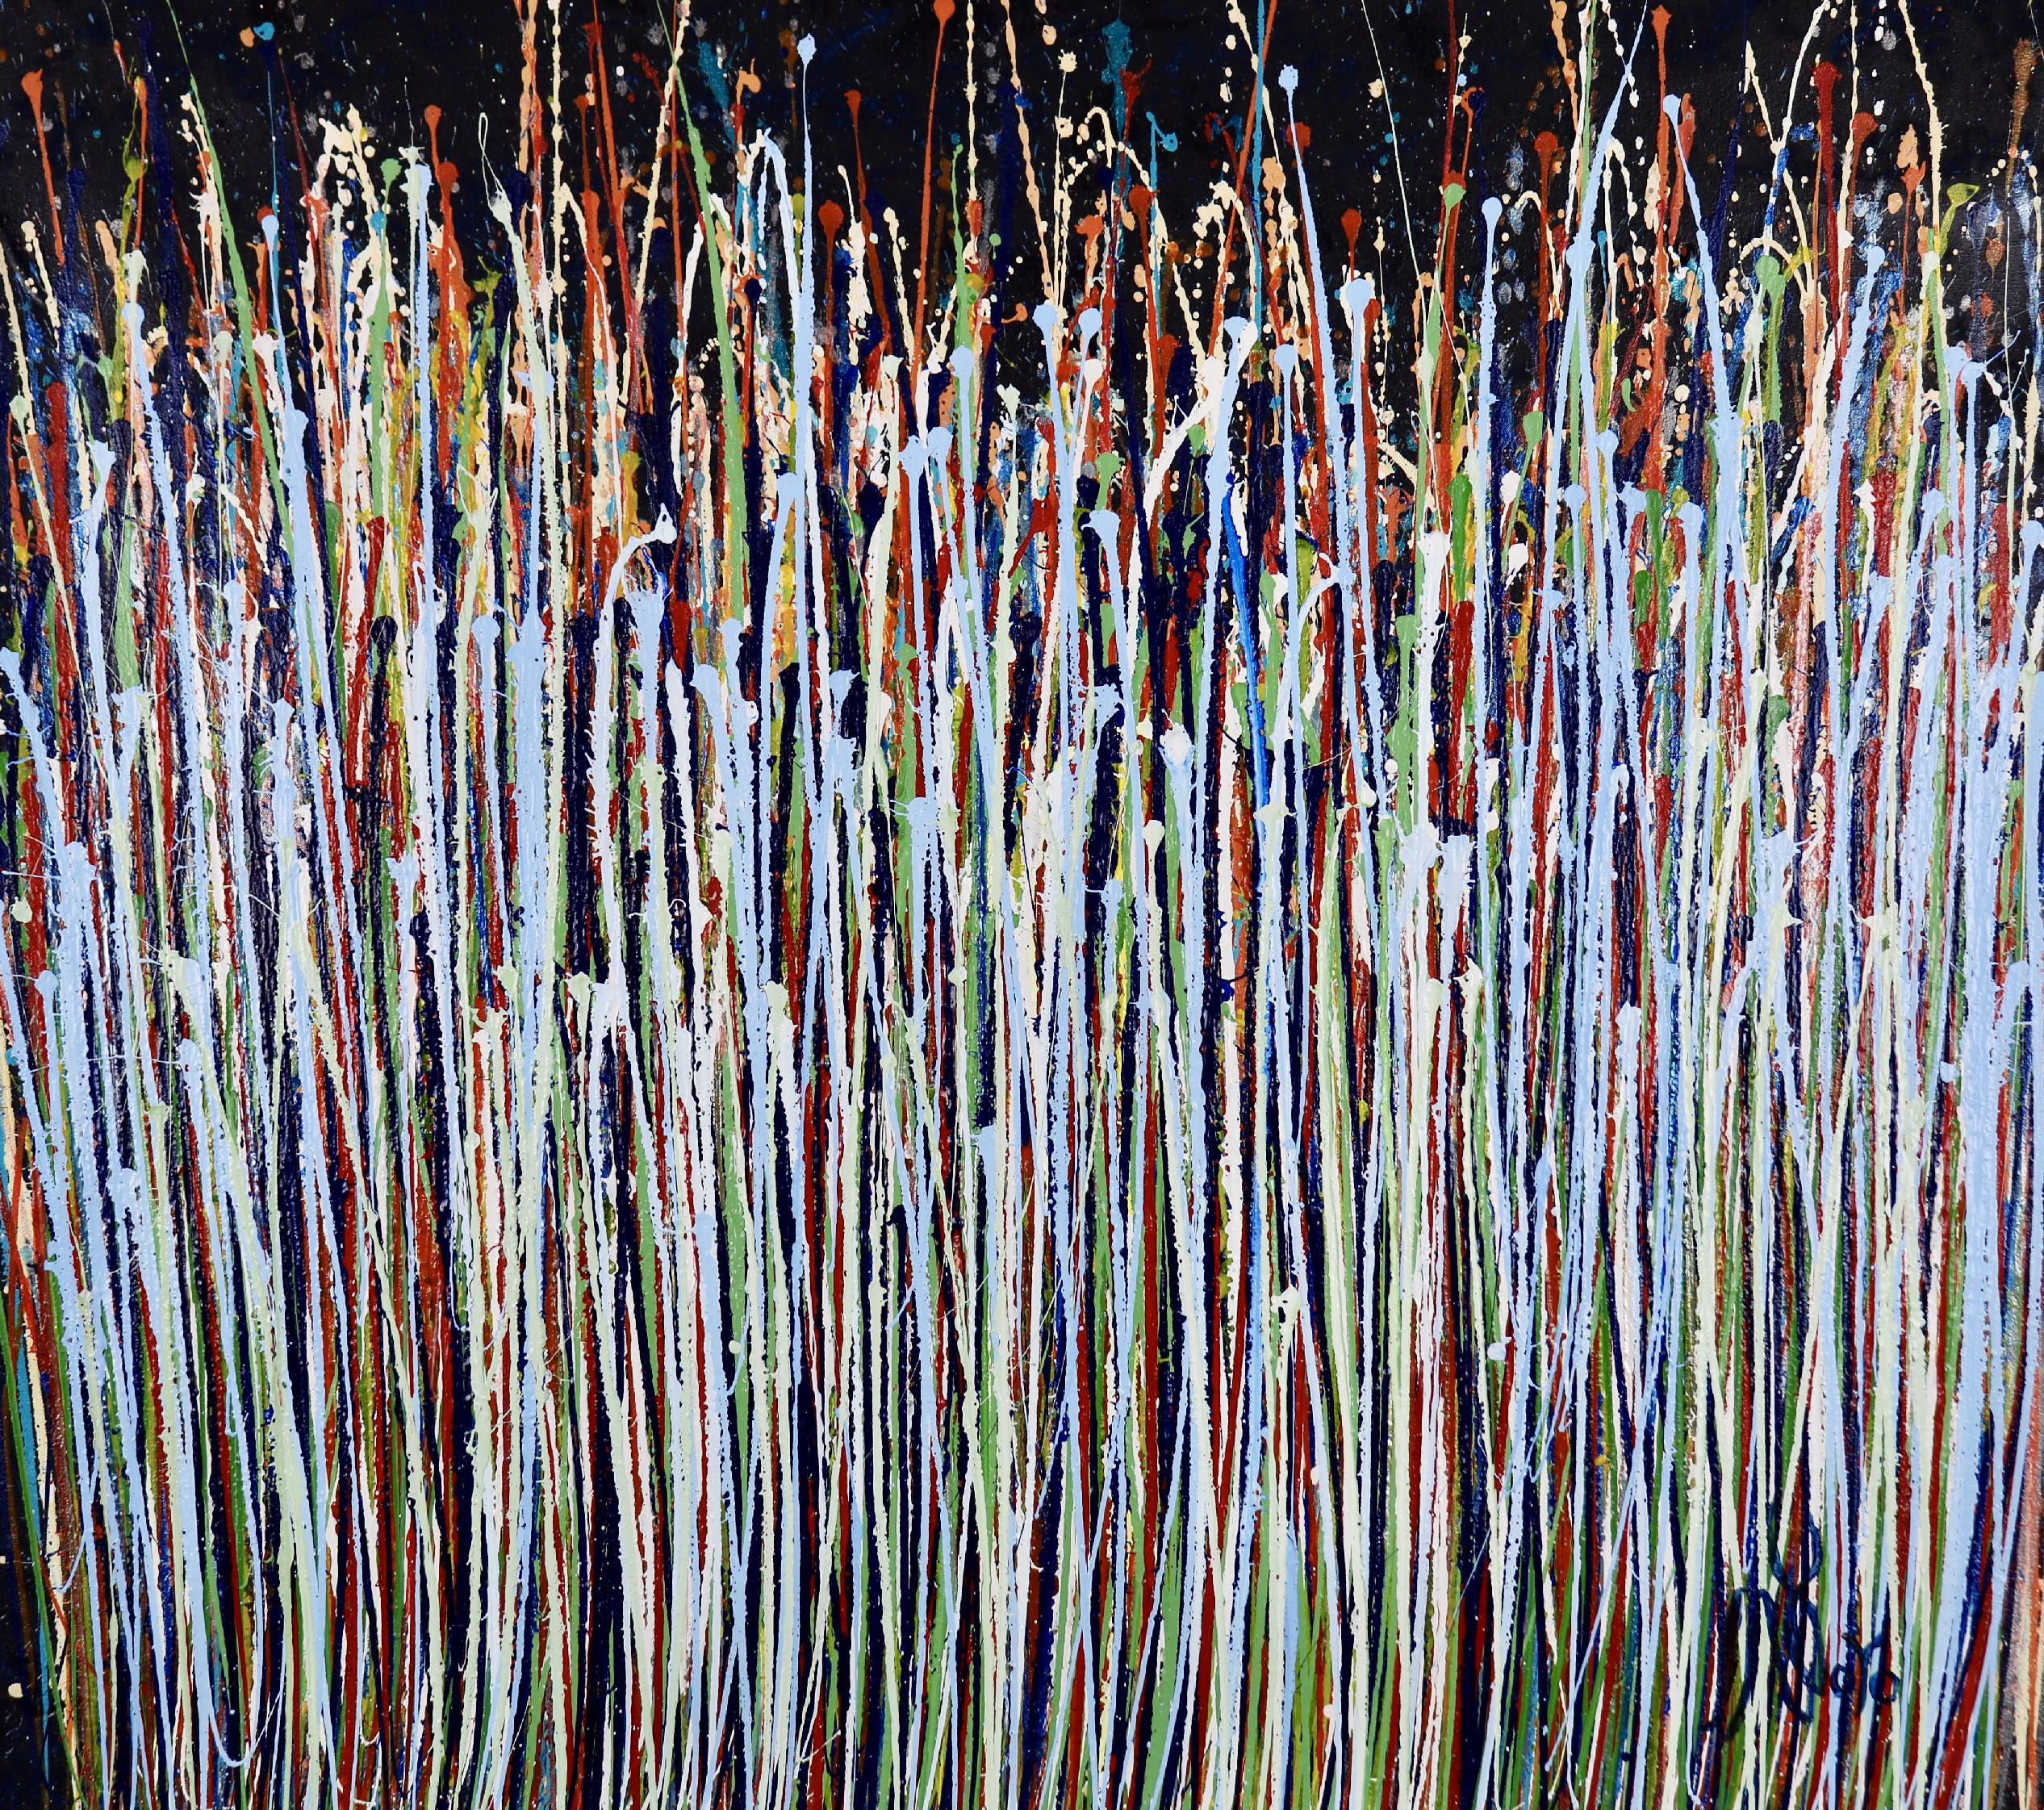 A sinful garden (anochecer) 2 | Inspired by nature abstract (2020) Acrylic painting by Nestor Toro